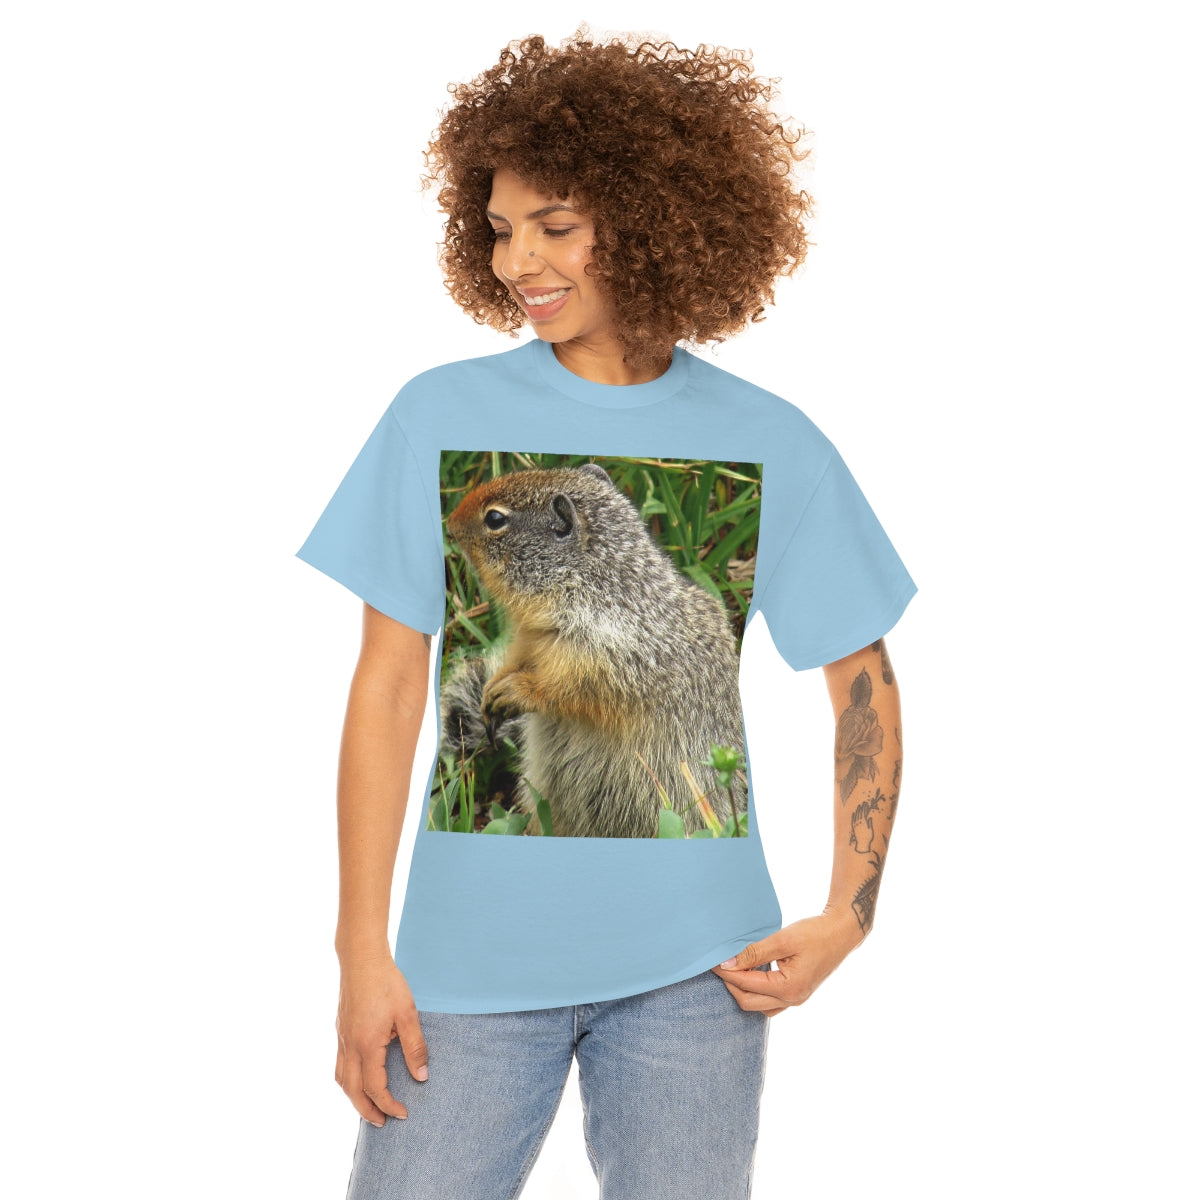 Inquisitive Stare - Unisex Heavy Cotton Tee - Fry1Productions